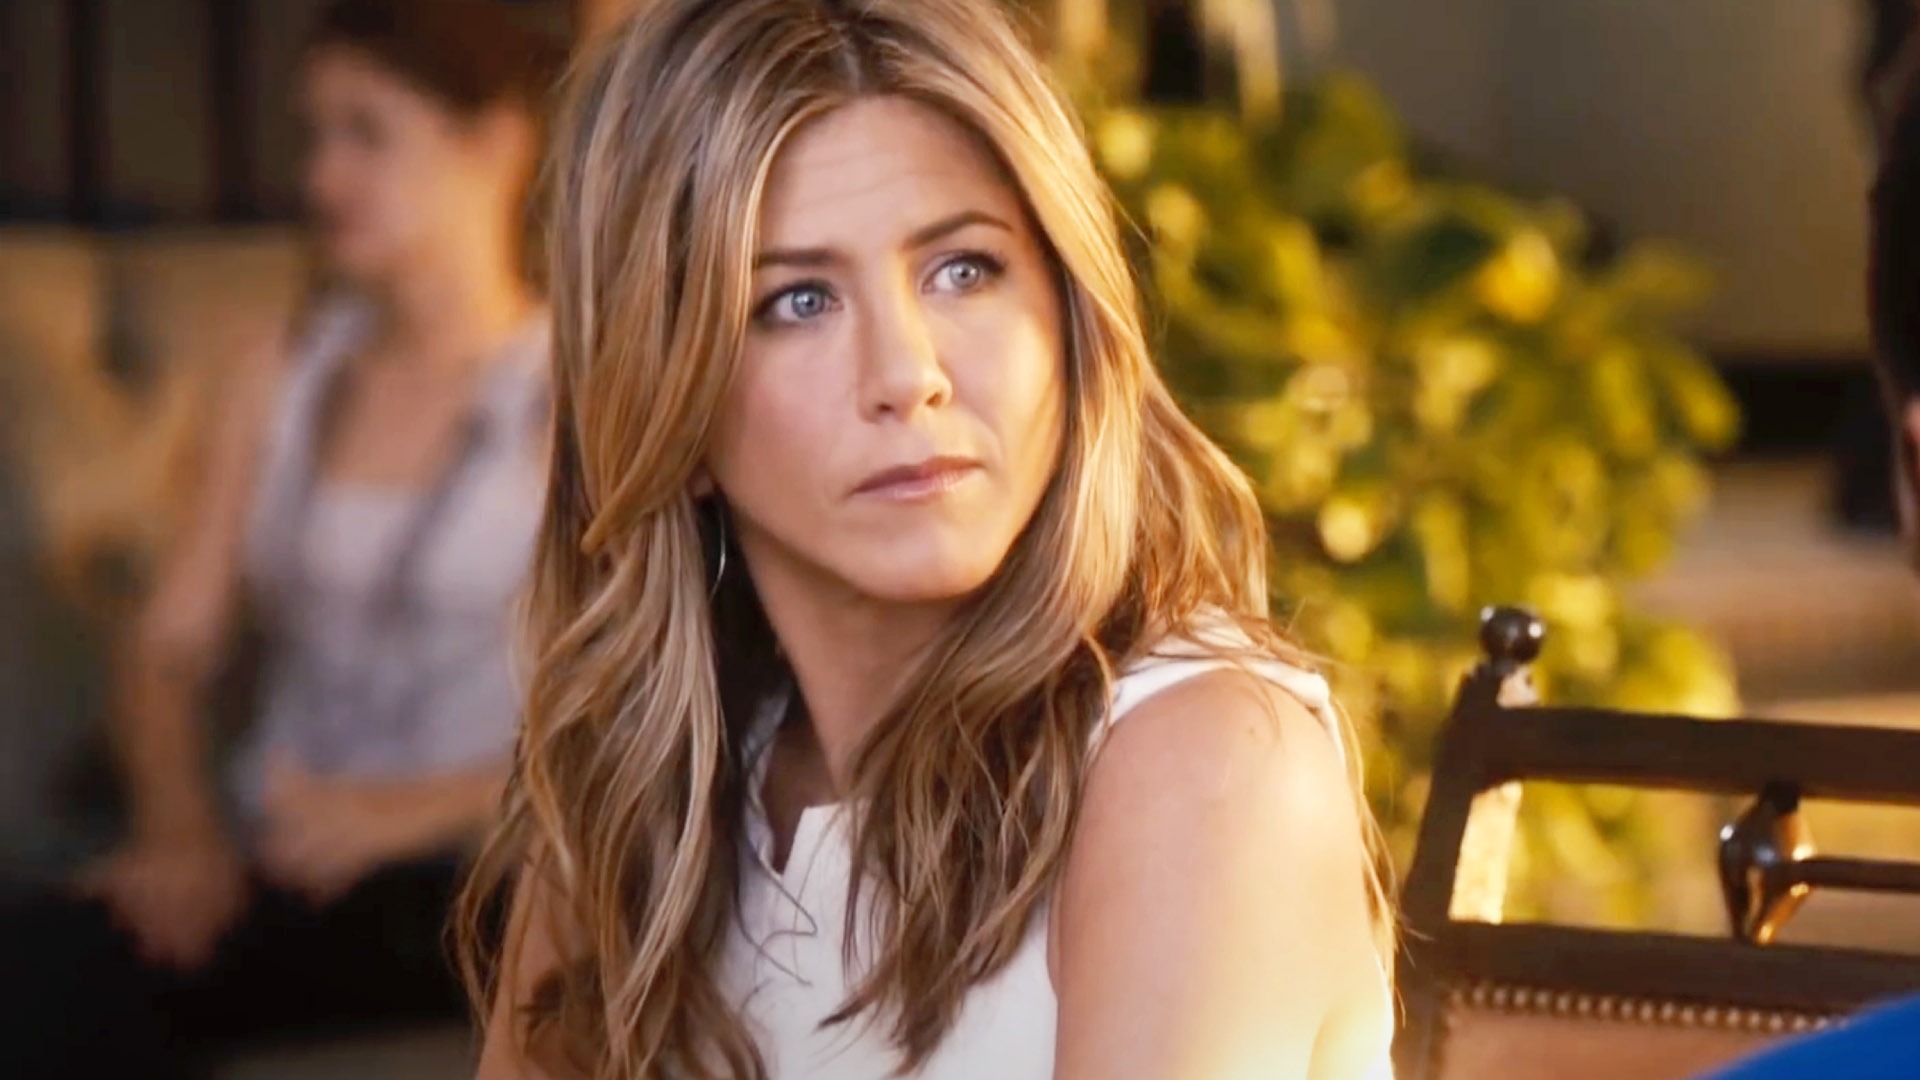 Jennifer Aniston's 'Just Go With It' Review: 'Predictable